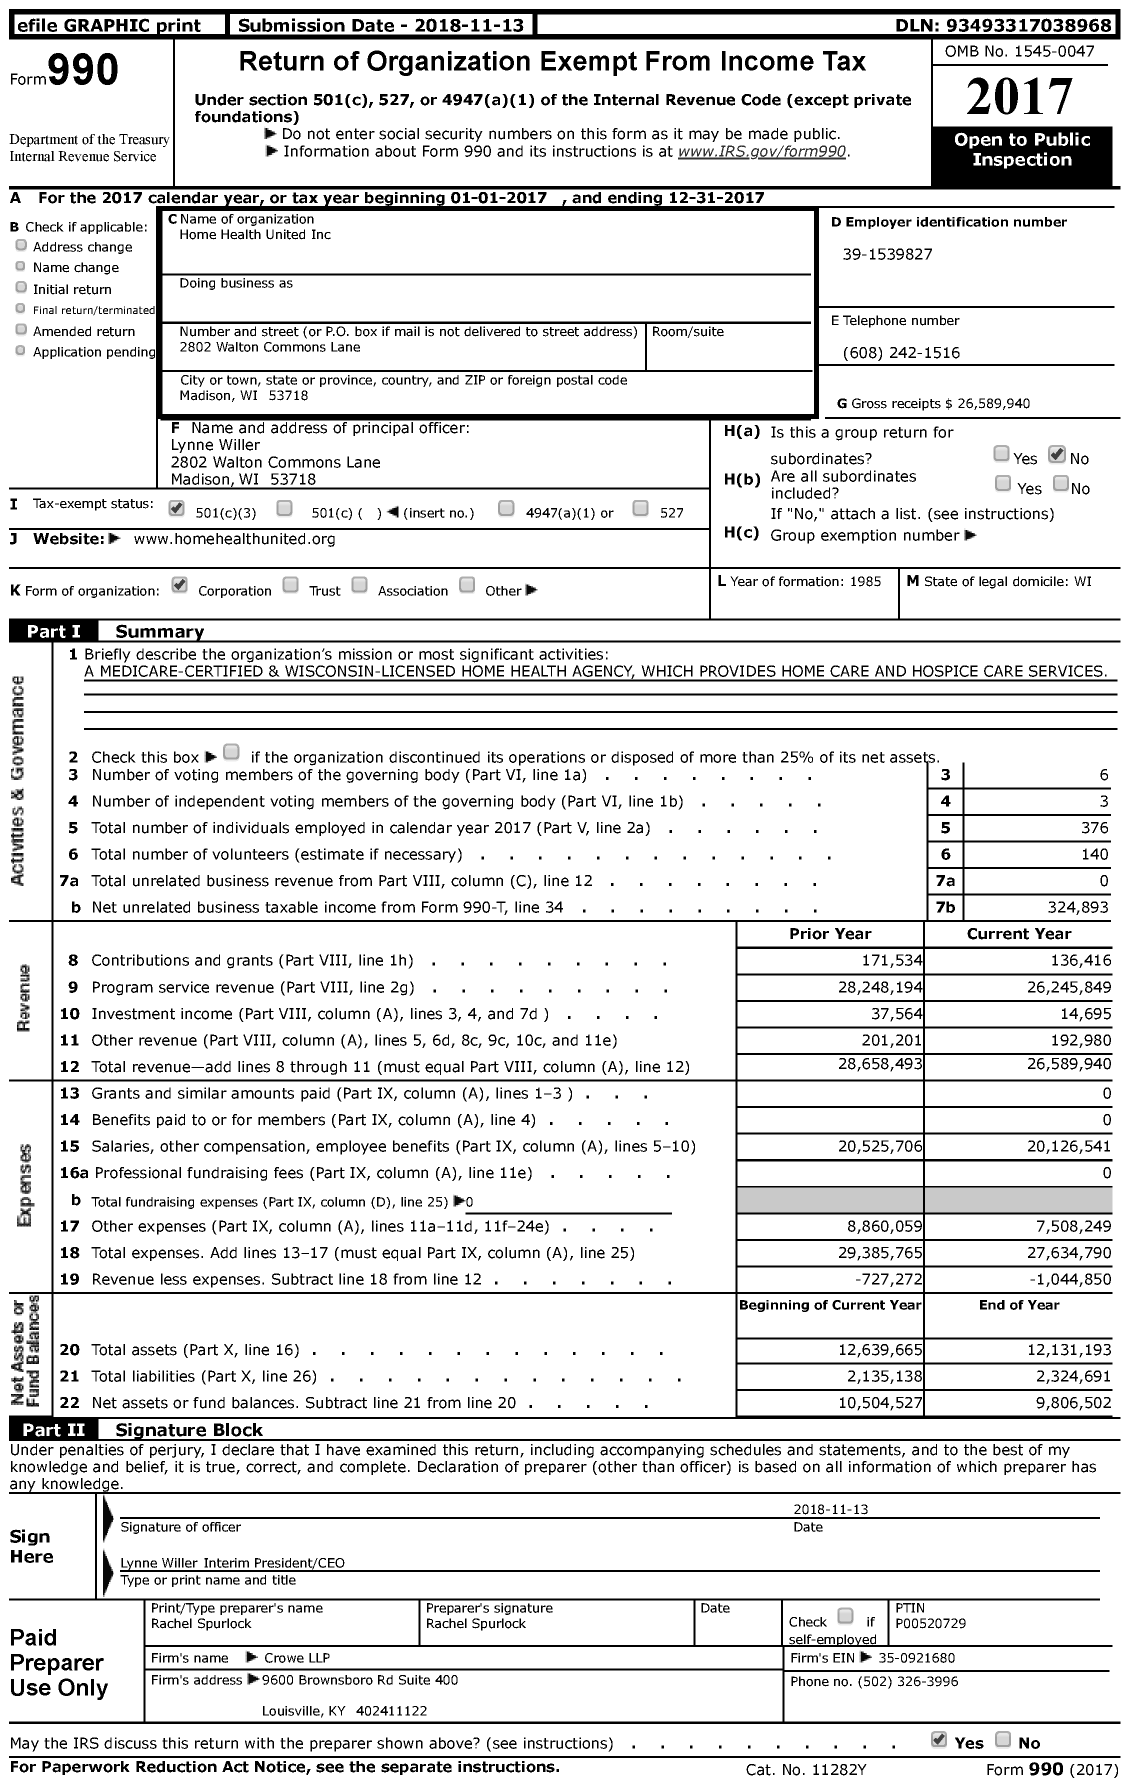 Image of first page of 2017 Form 990 for Home Health United (HHU)